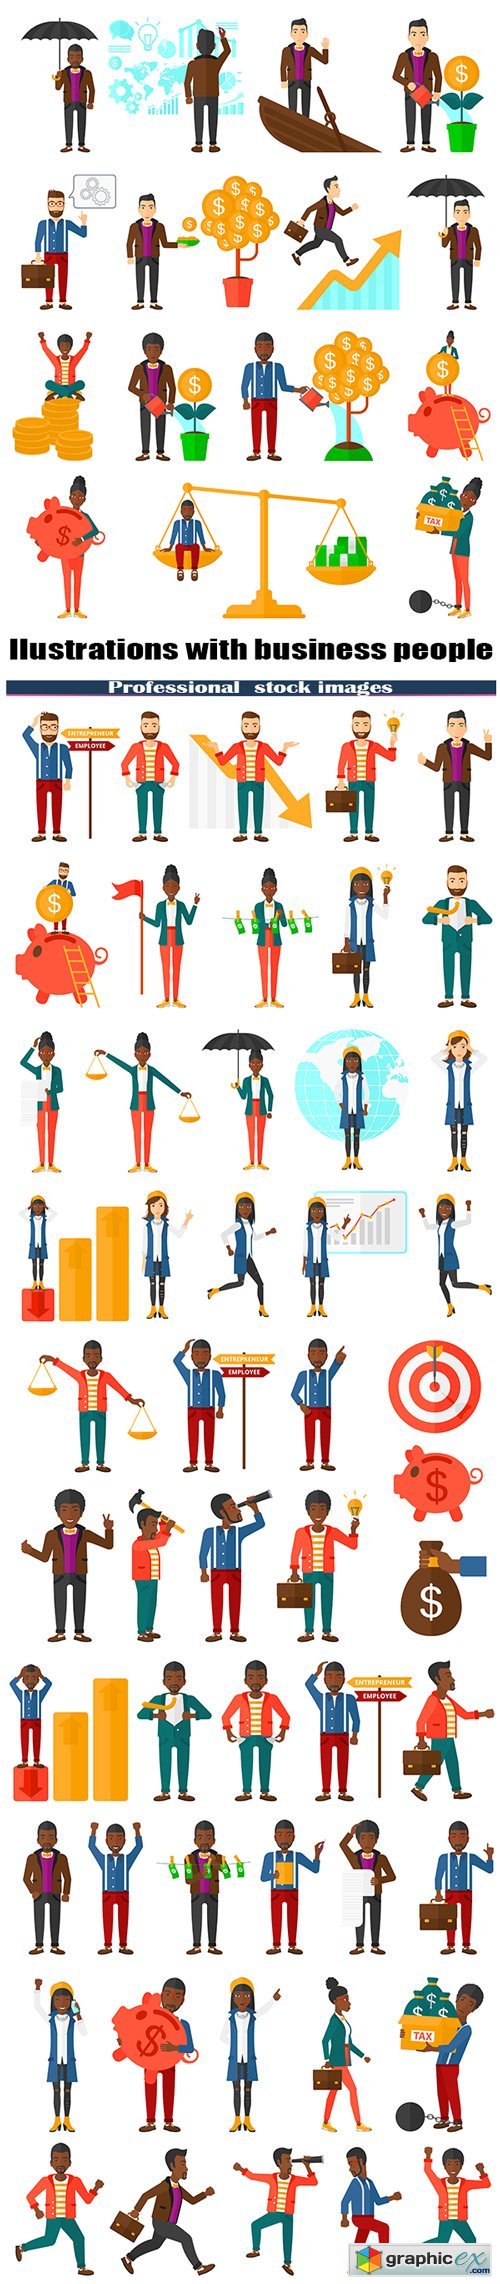 Set of illustrations with business people